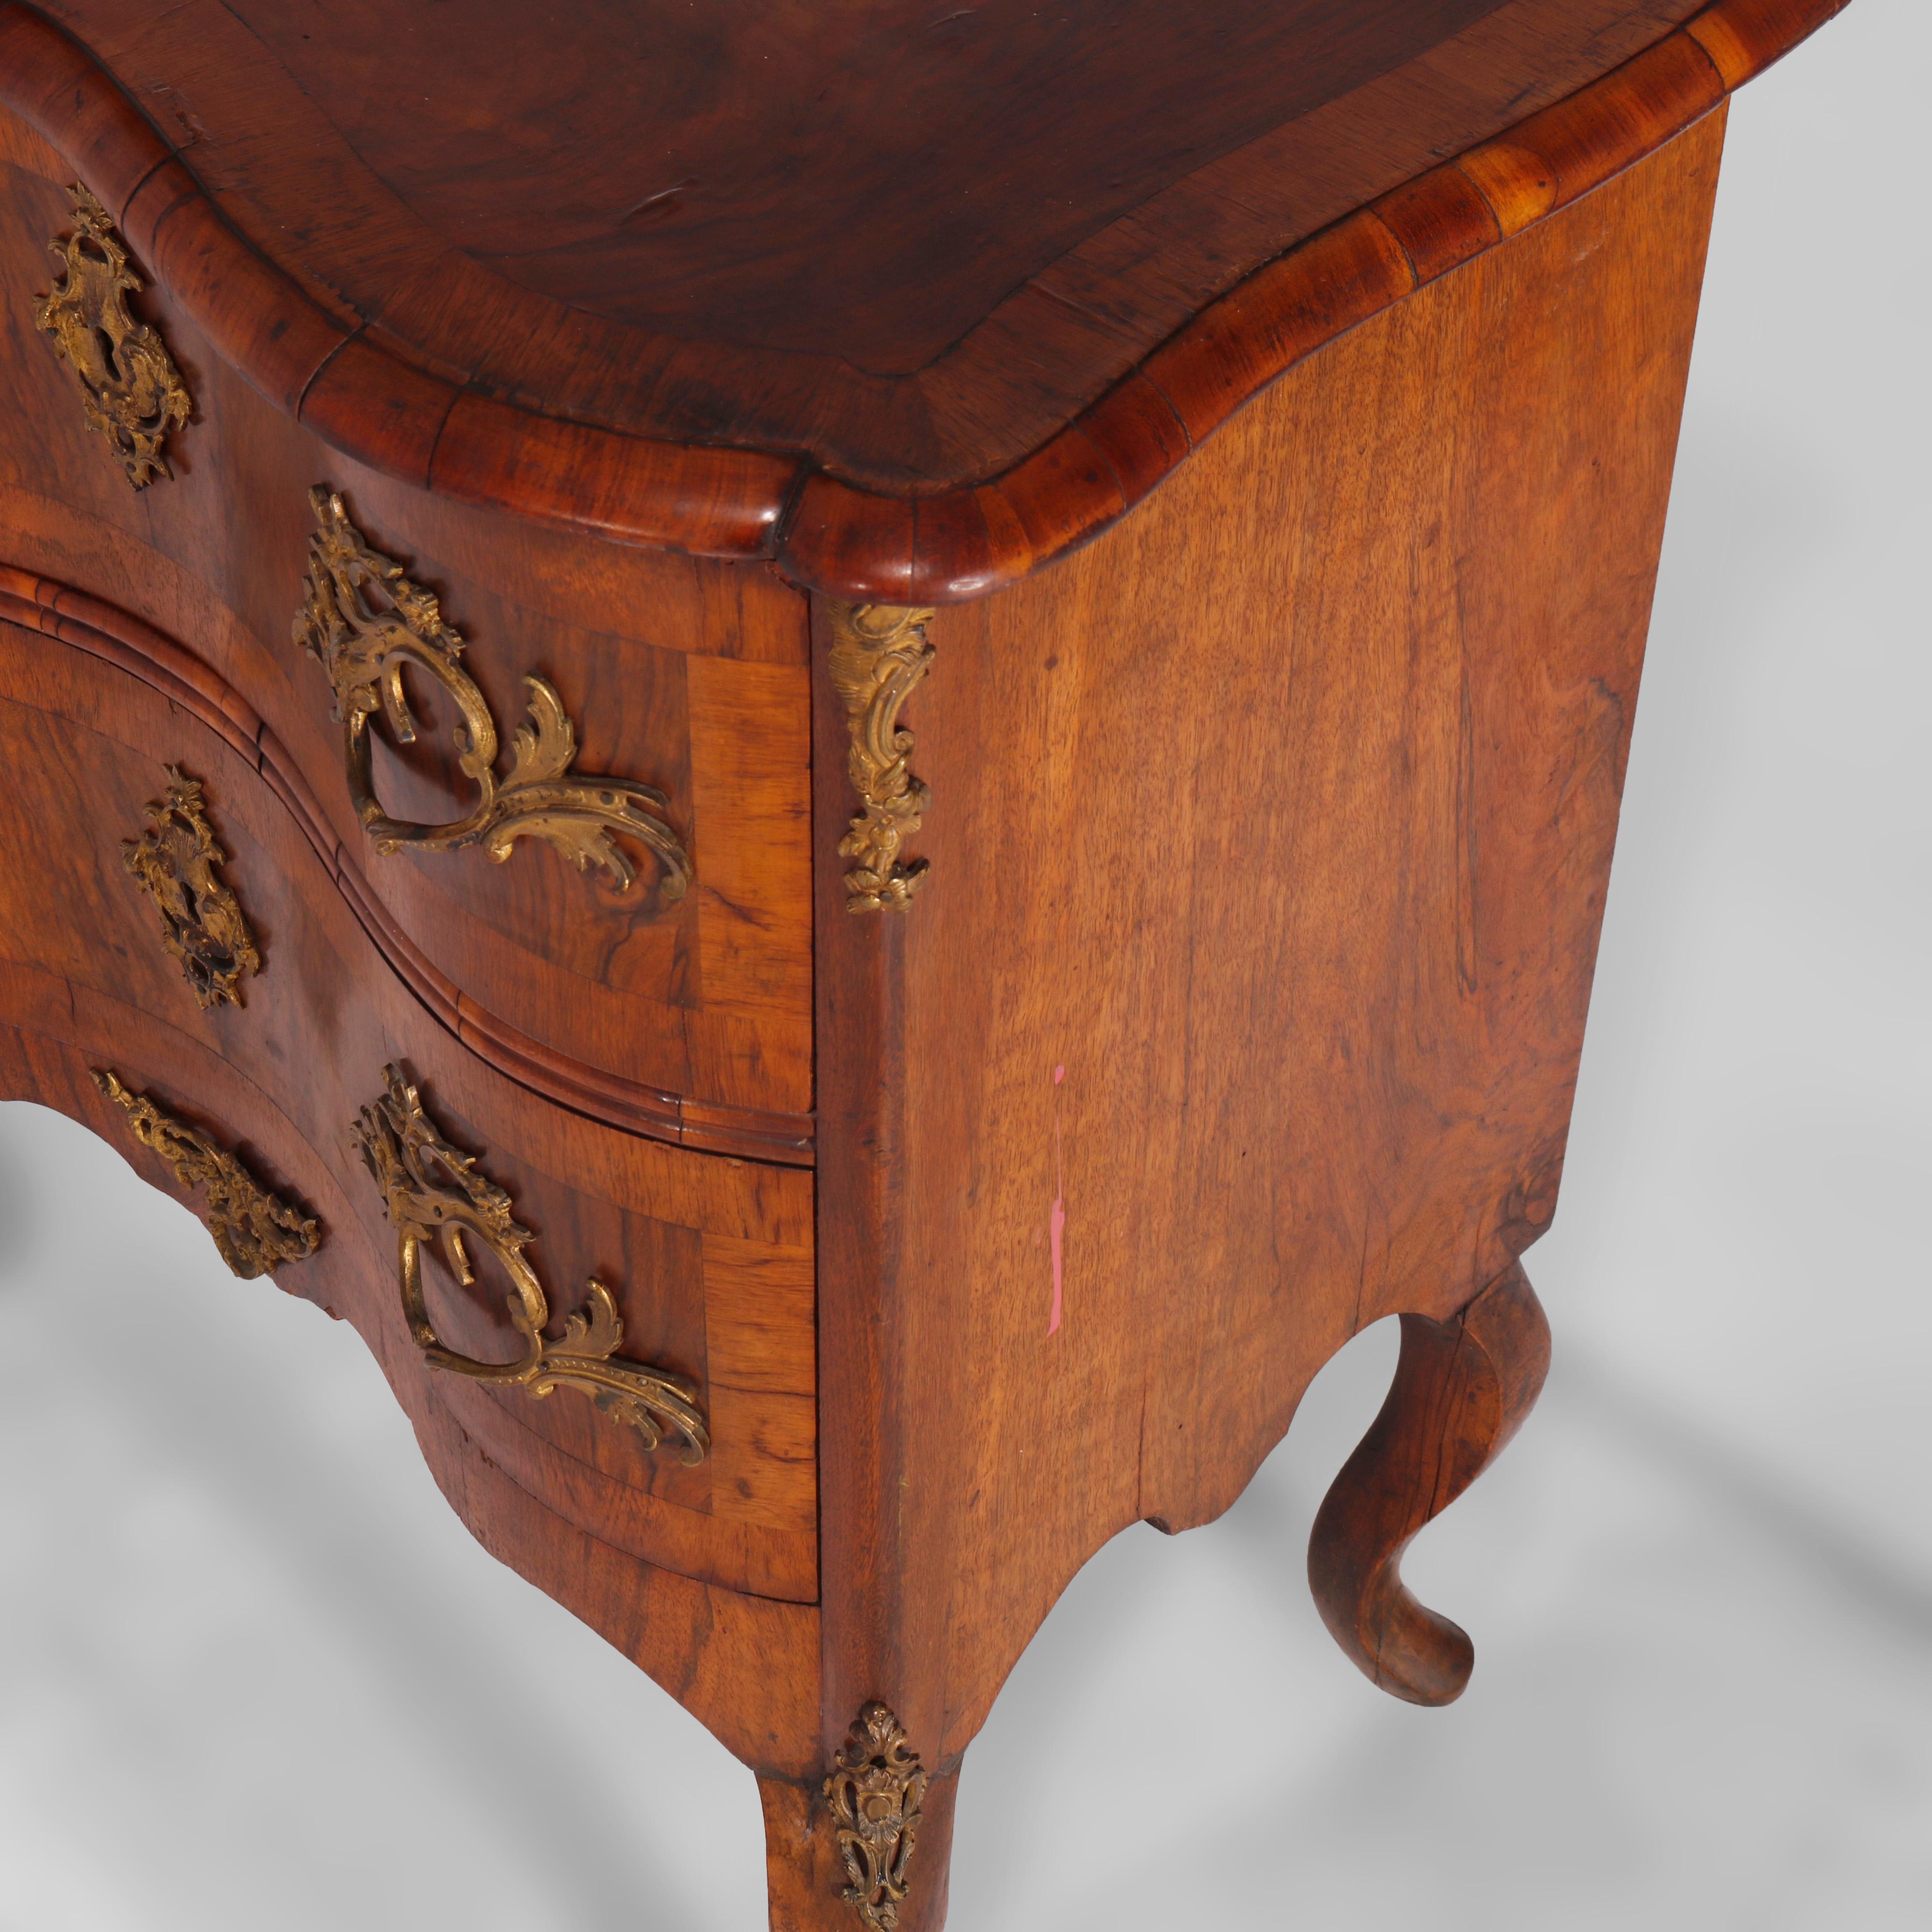 18th Century  Antique Italian Kingwood, Satinwood & Burl Chest with Ormolu Mounts Late 18th C For Sale